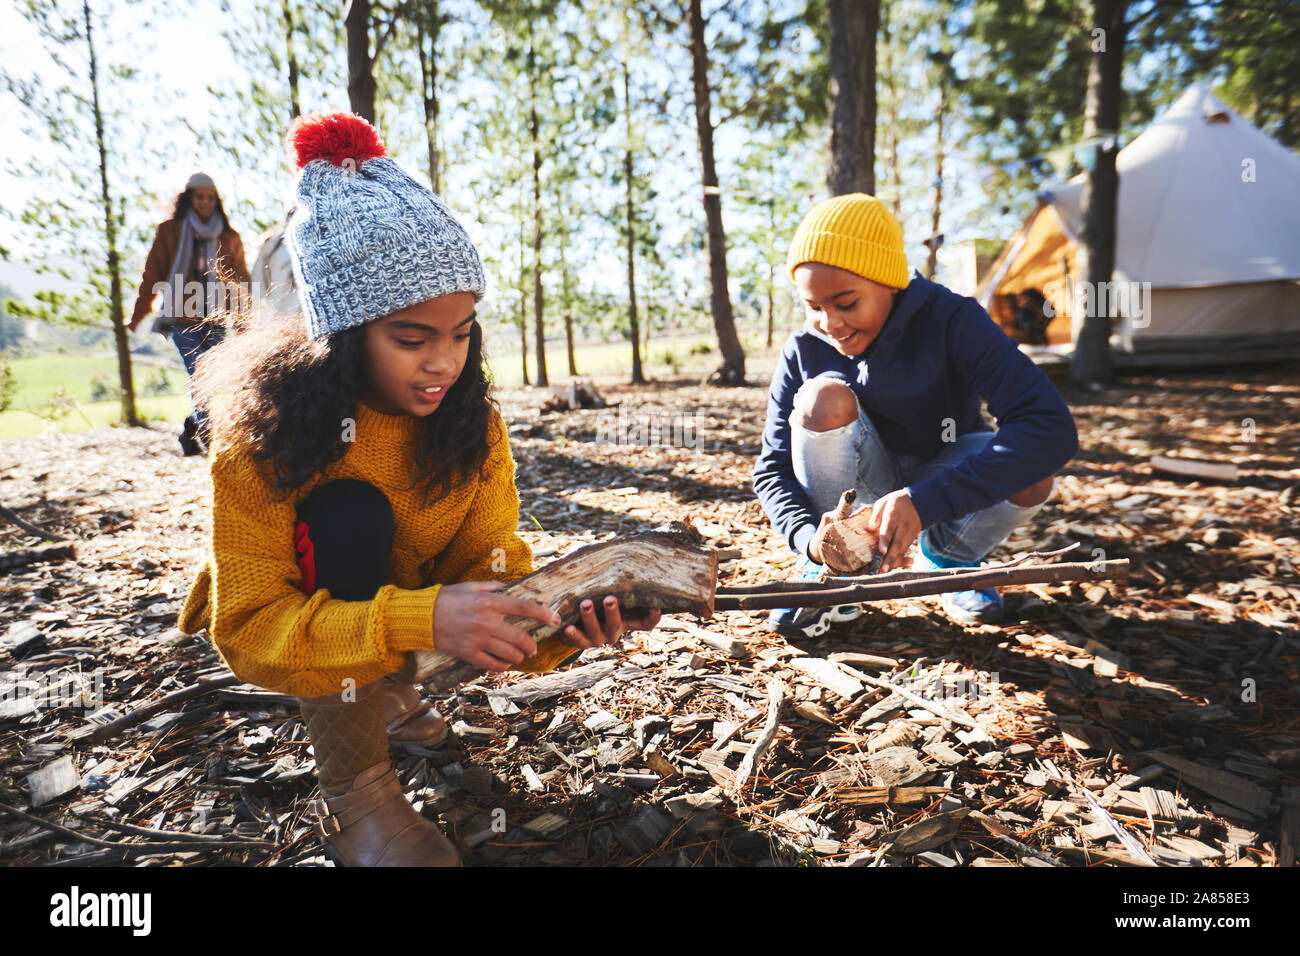 Brother and sister gathering firewood kindling at campsite in sunny woods Stock Photo